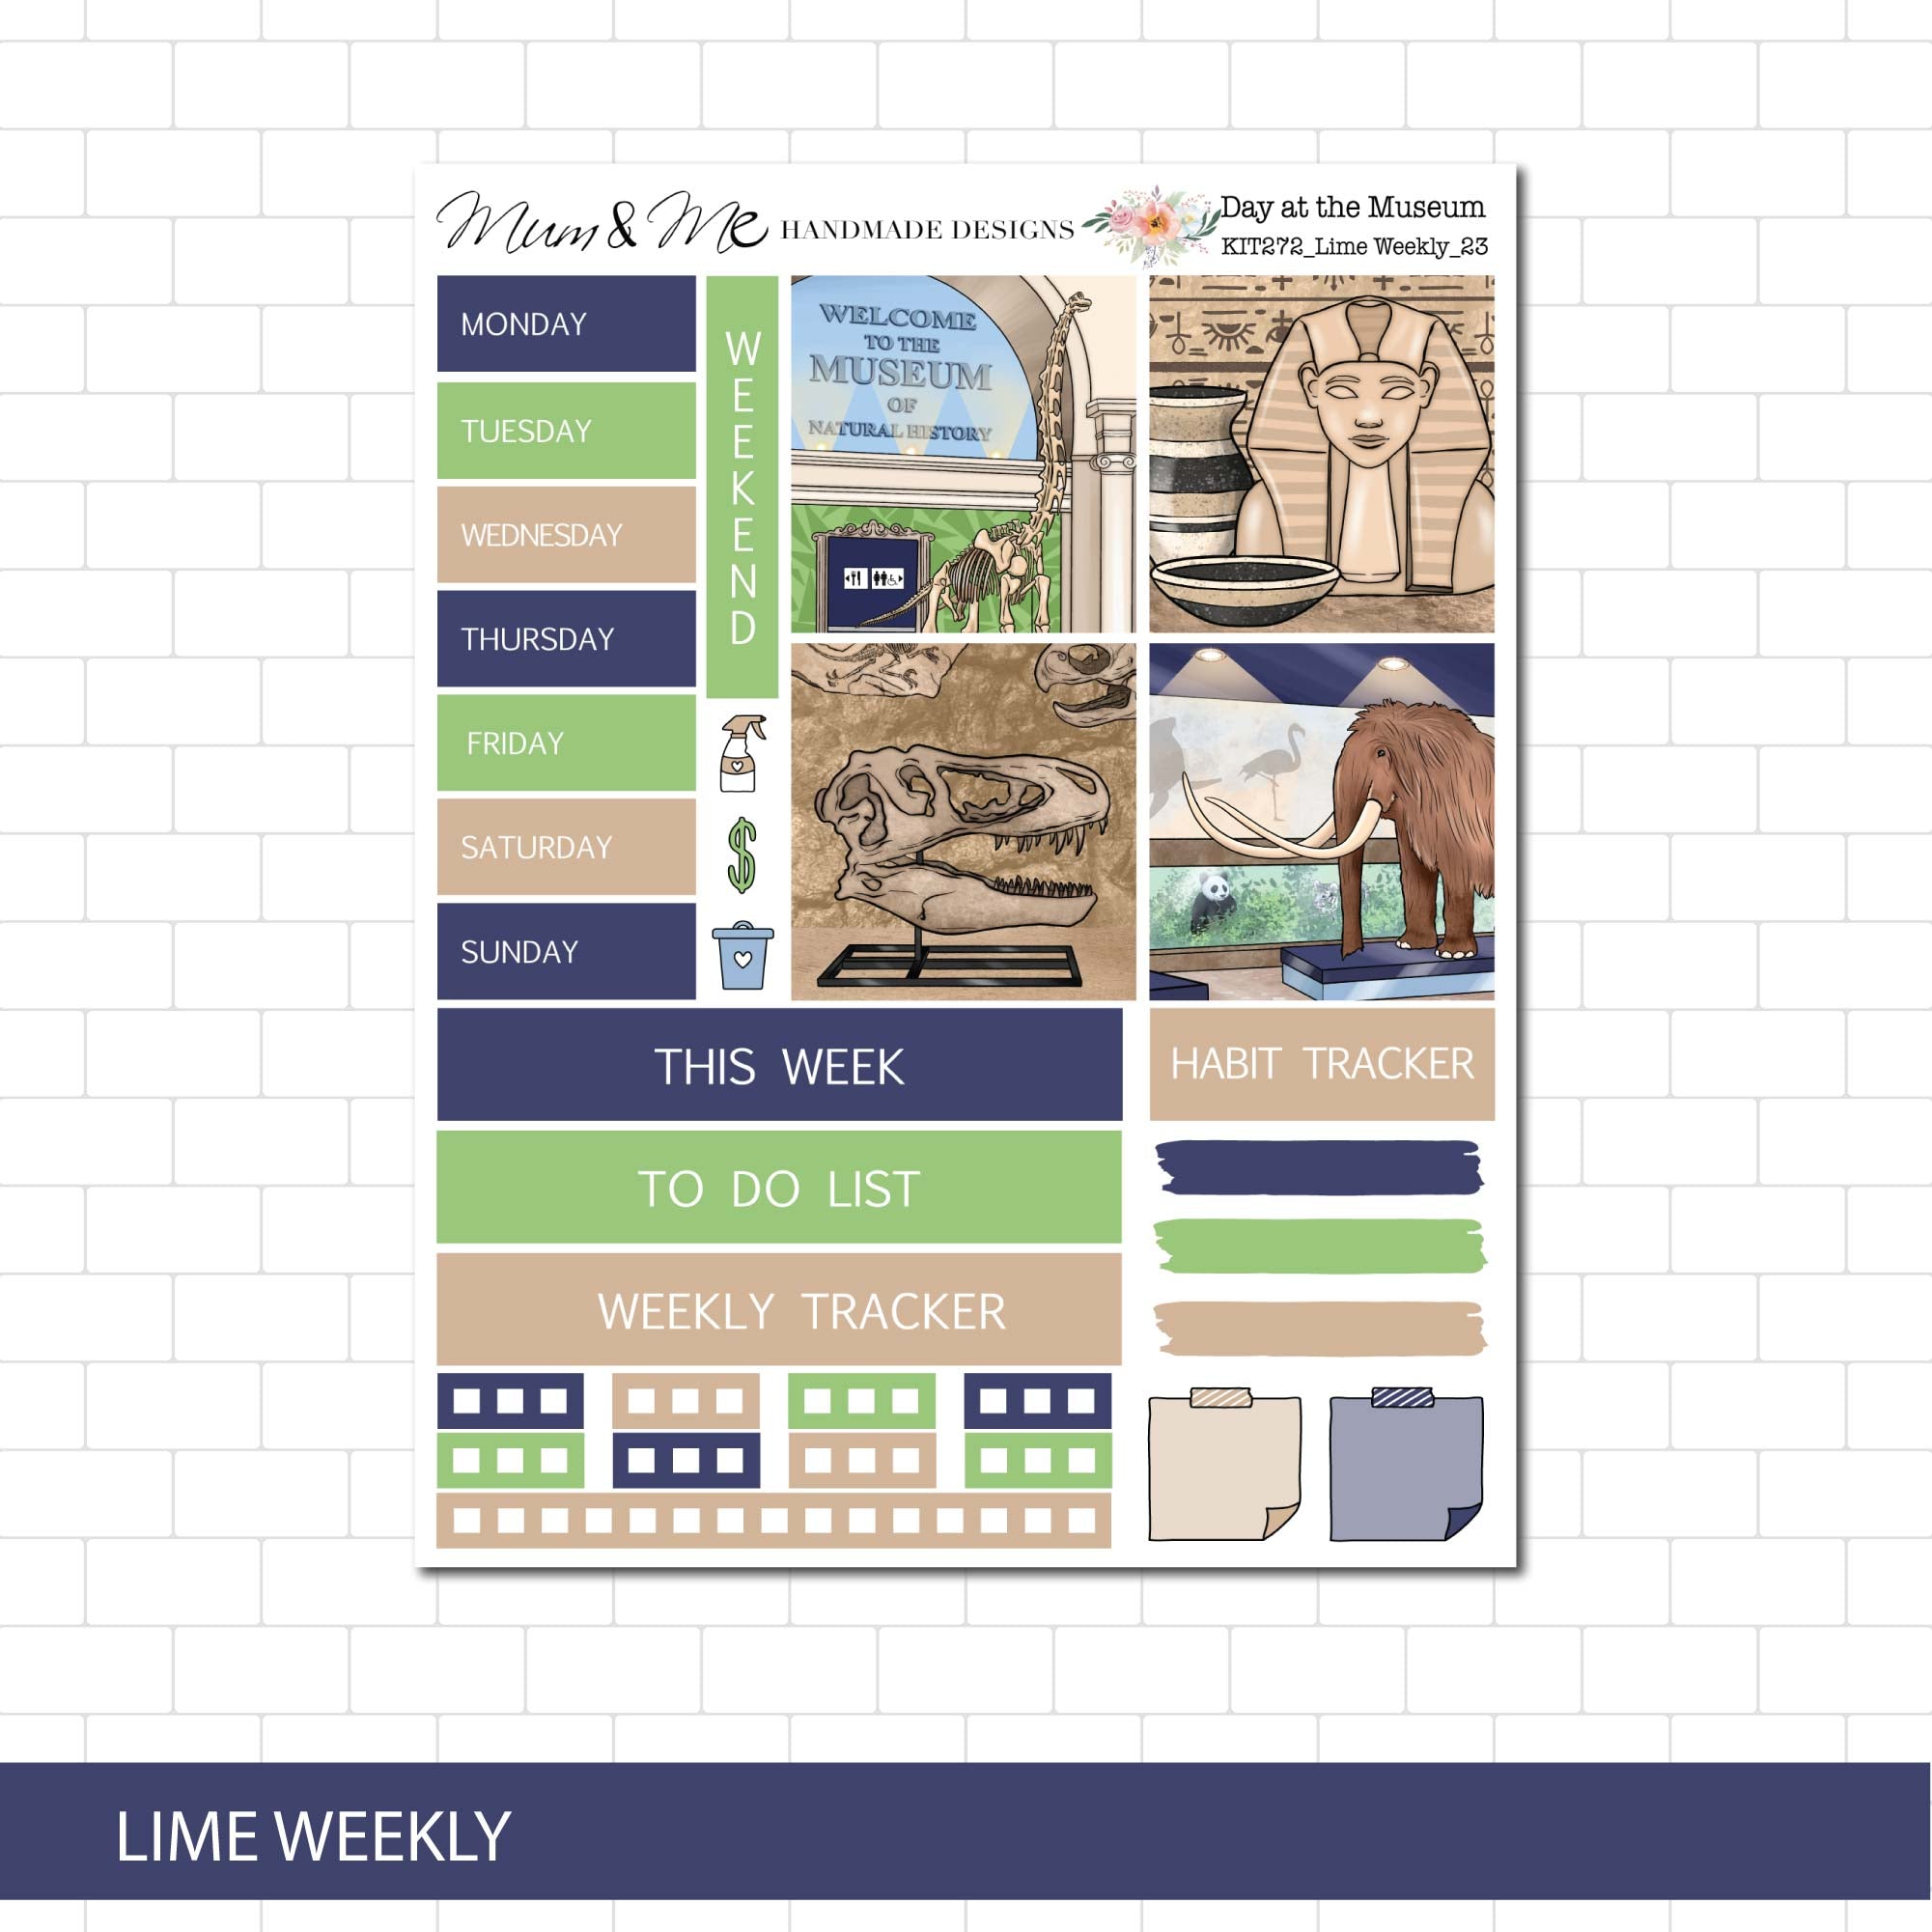 Lime Weekly: Day at the Museum